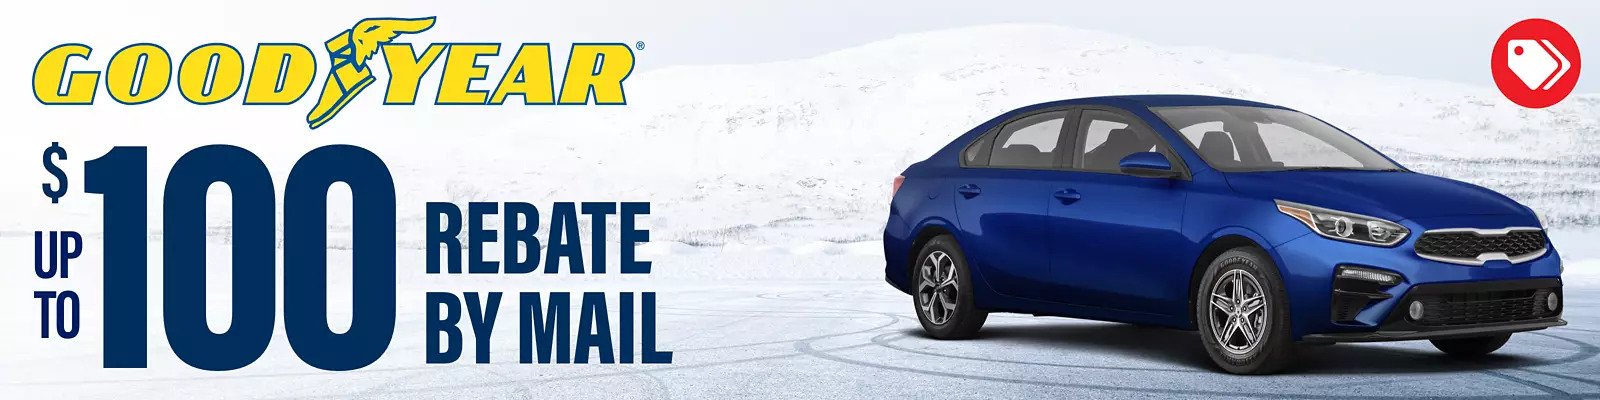 Goodyear tire rebate for October 2021 with Discount Tire Direct